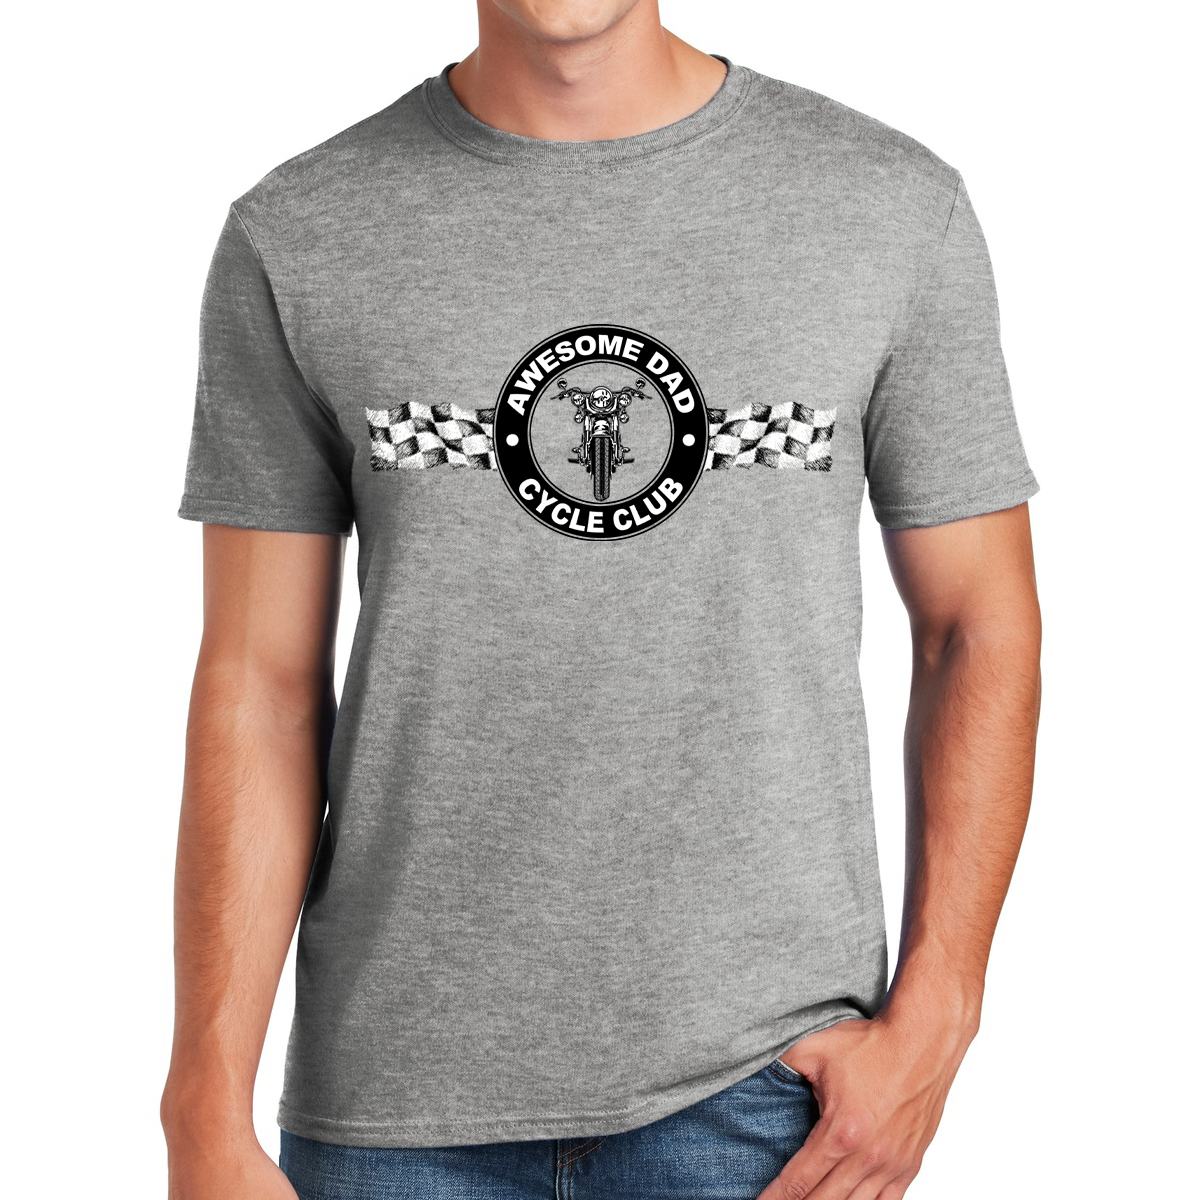 Biker Dad Riding With The Cycle Club Under The Checkered Flag Awesome Dad T-shirt